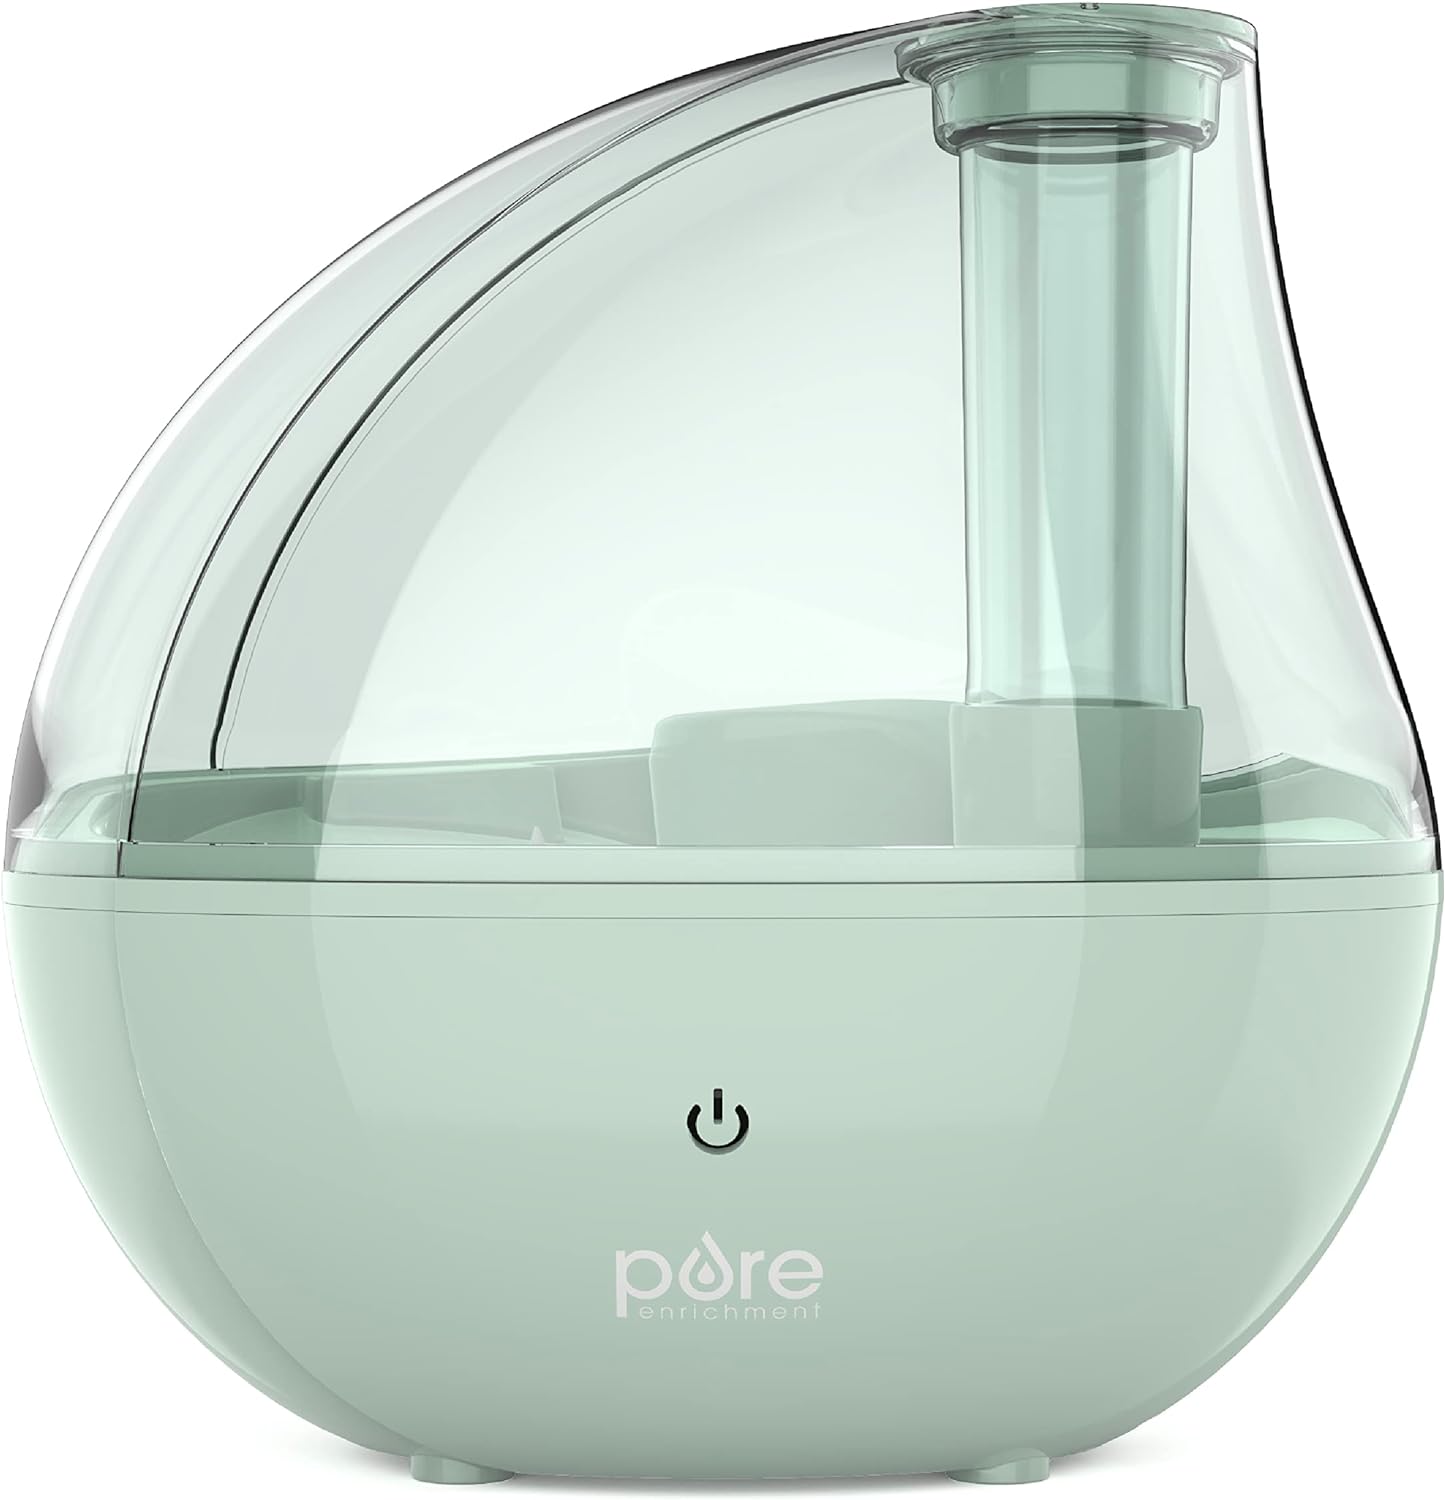 Pure Enrichment MistAire Silver Ultrasonic Cool Mist Humidifier - Lasts Up to 25 Hours, Whisper-Quiet Overnight Operation, 360 Mist Nozzle, Easy-Fill Tank, & Auto Safety Shut-Off (Whisper Green)